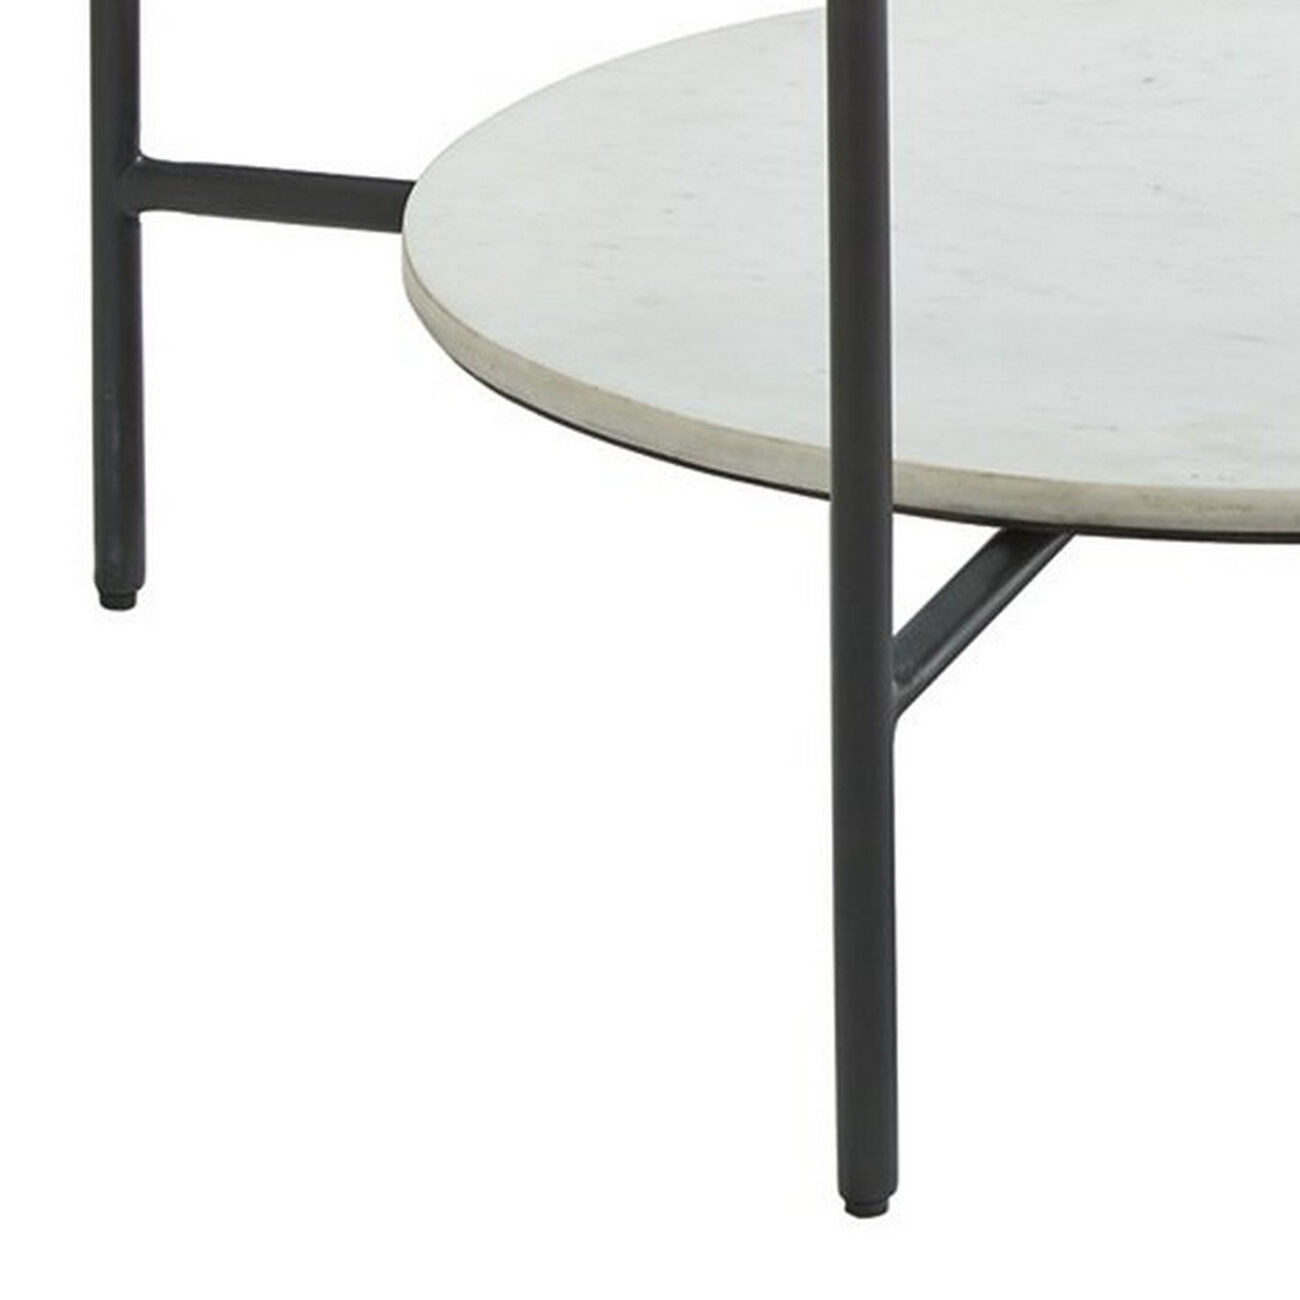 Glass Top Round Cocktail Table with Marble Shelf, Black and White